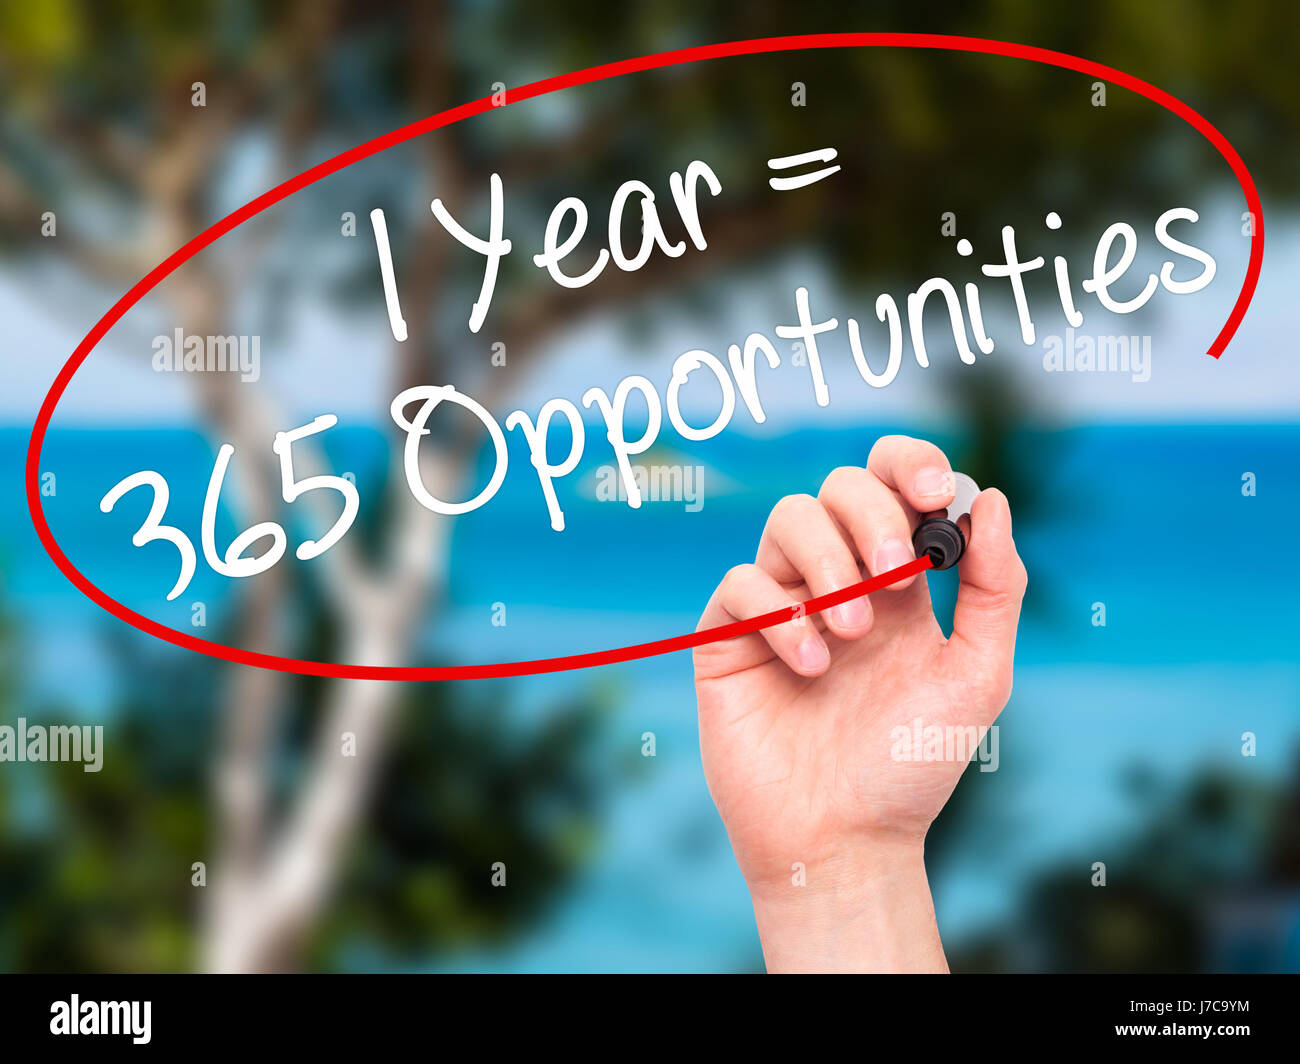 Man Hand Writing 1 Year 365 Opportunities With Black Marker On Stock Photo Alamy